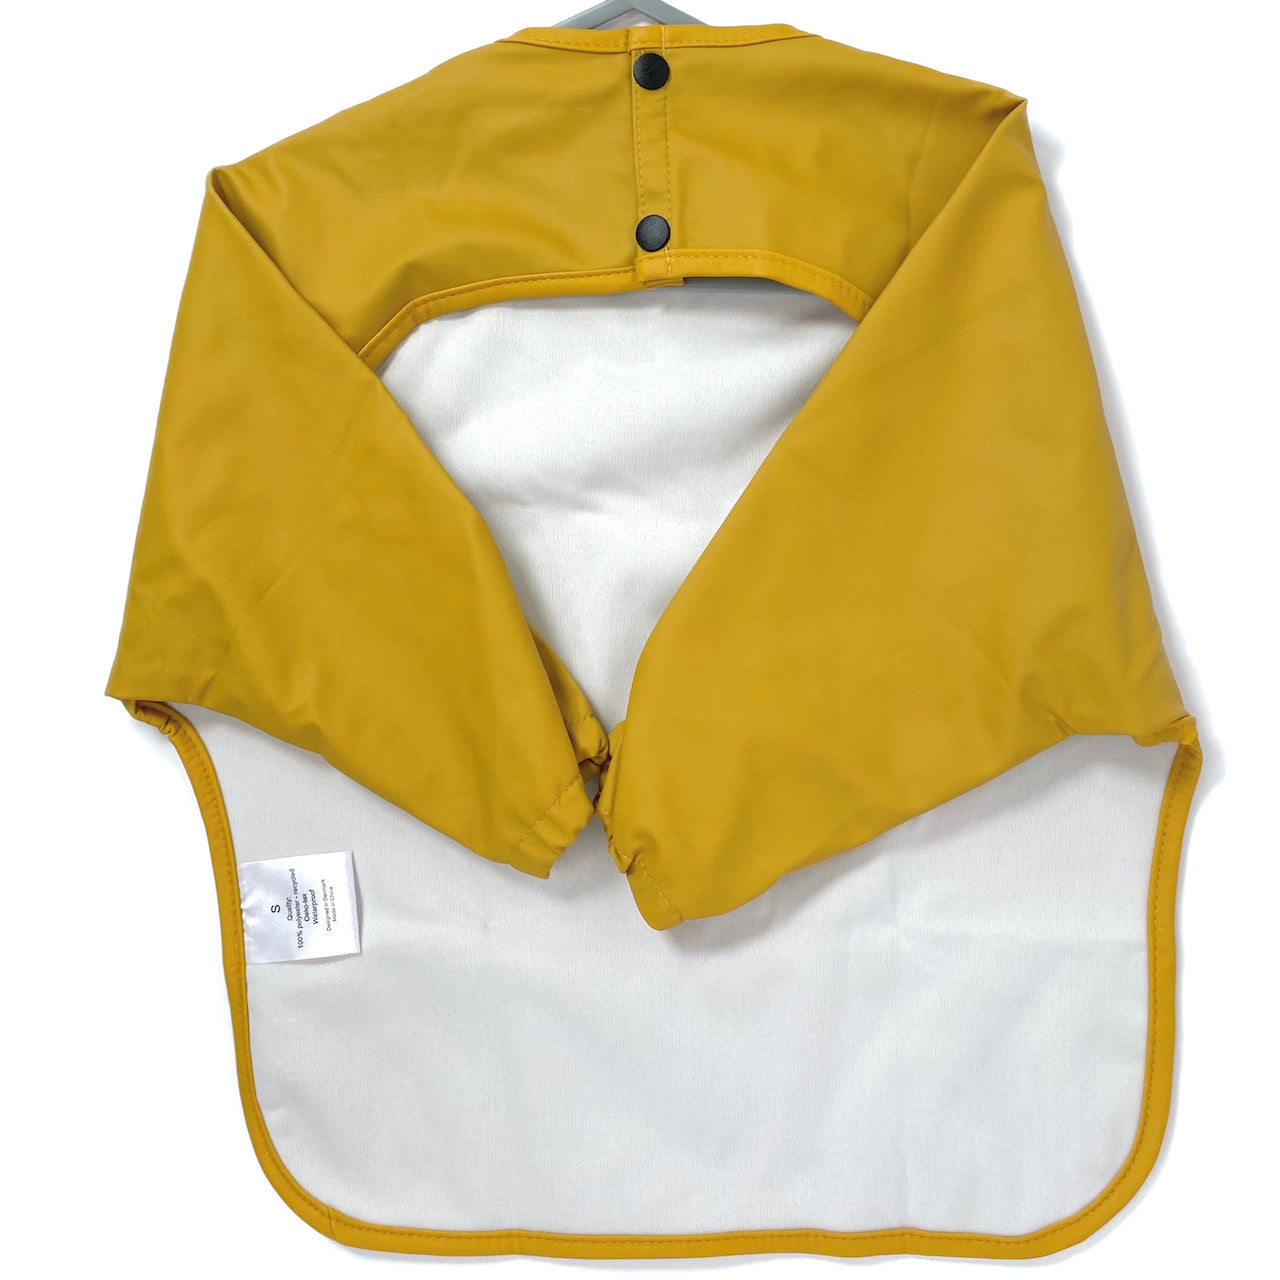 Long-sleeve kids apron in butterscotch yellow colour, showing back view.